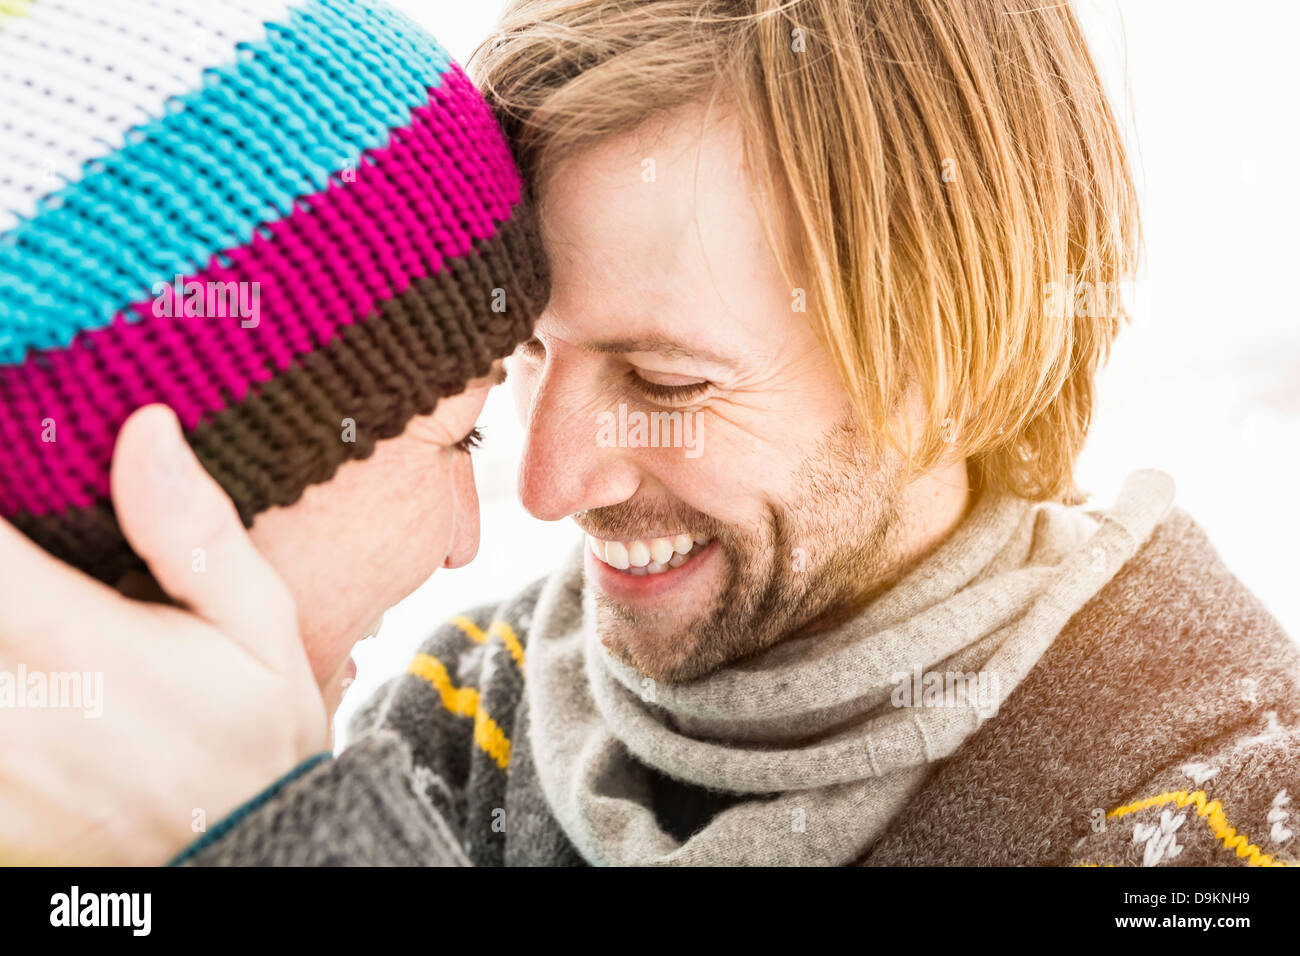 Couple face to face, woman wearing knit hat Stock Photo